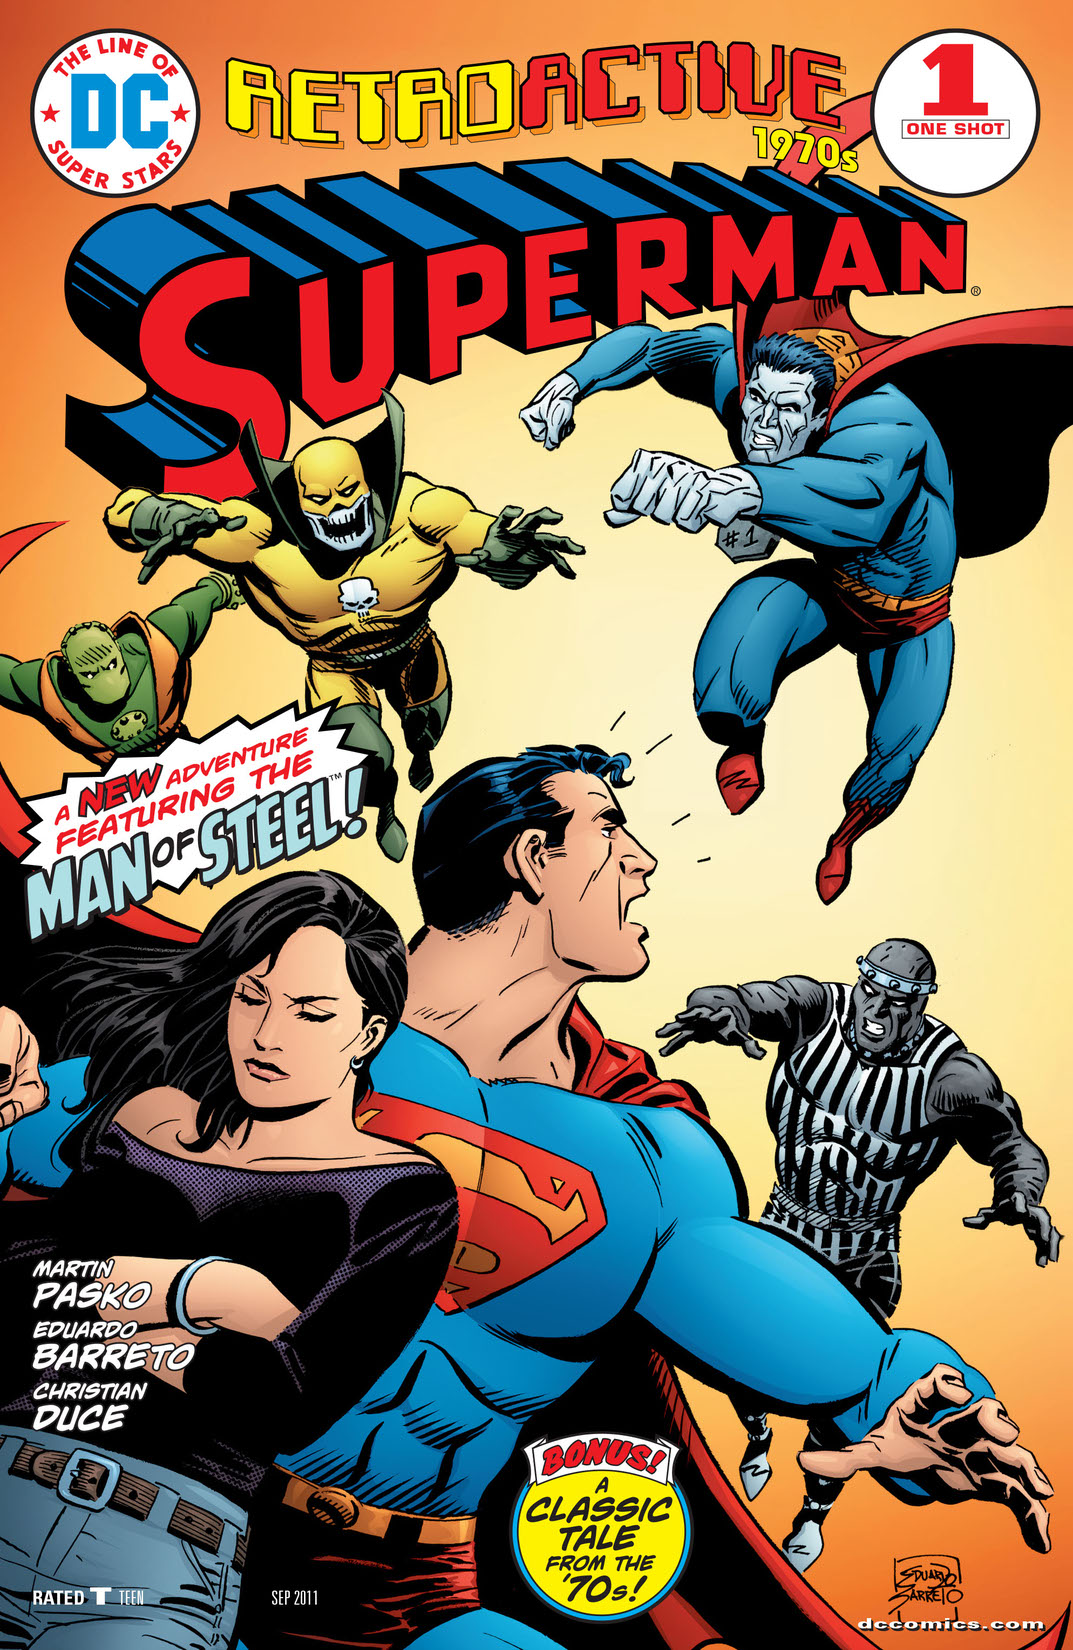 DC Retroactive: Superman - The '70s #1 preview images